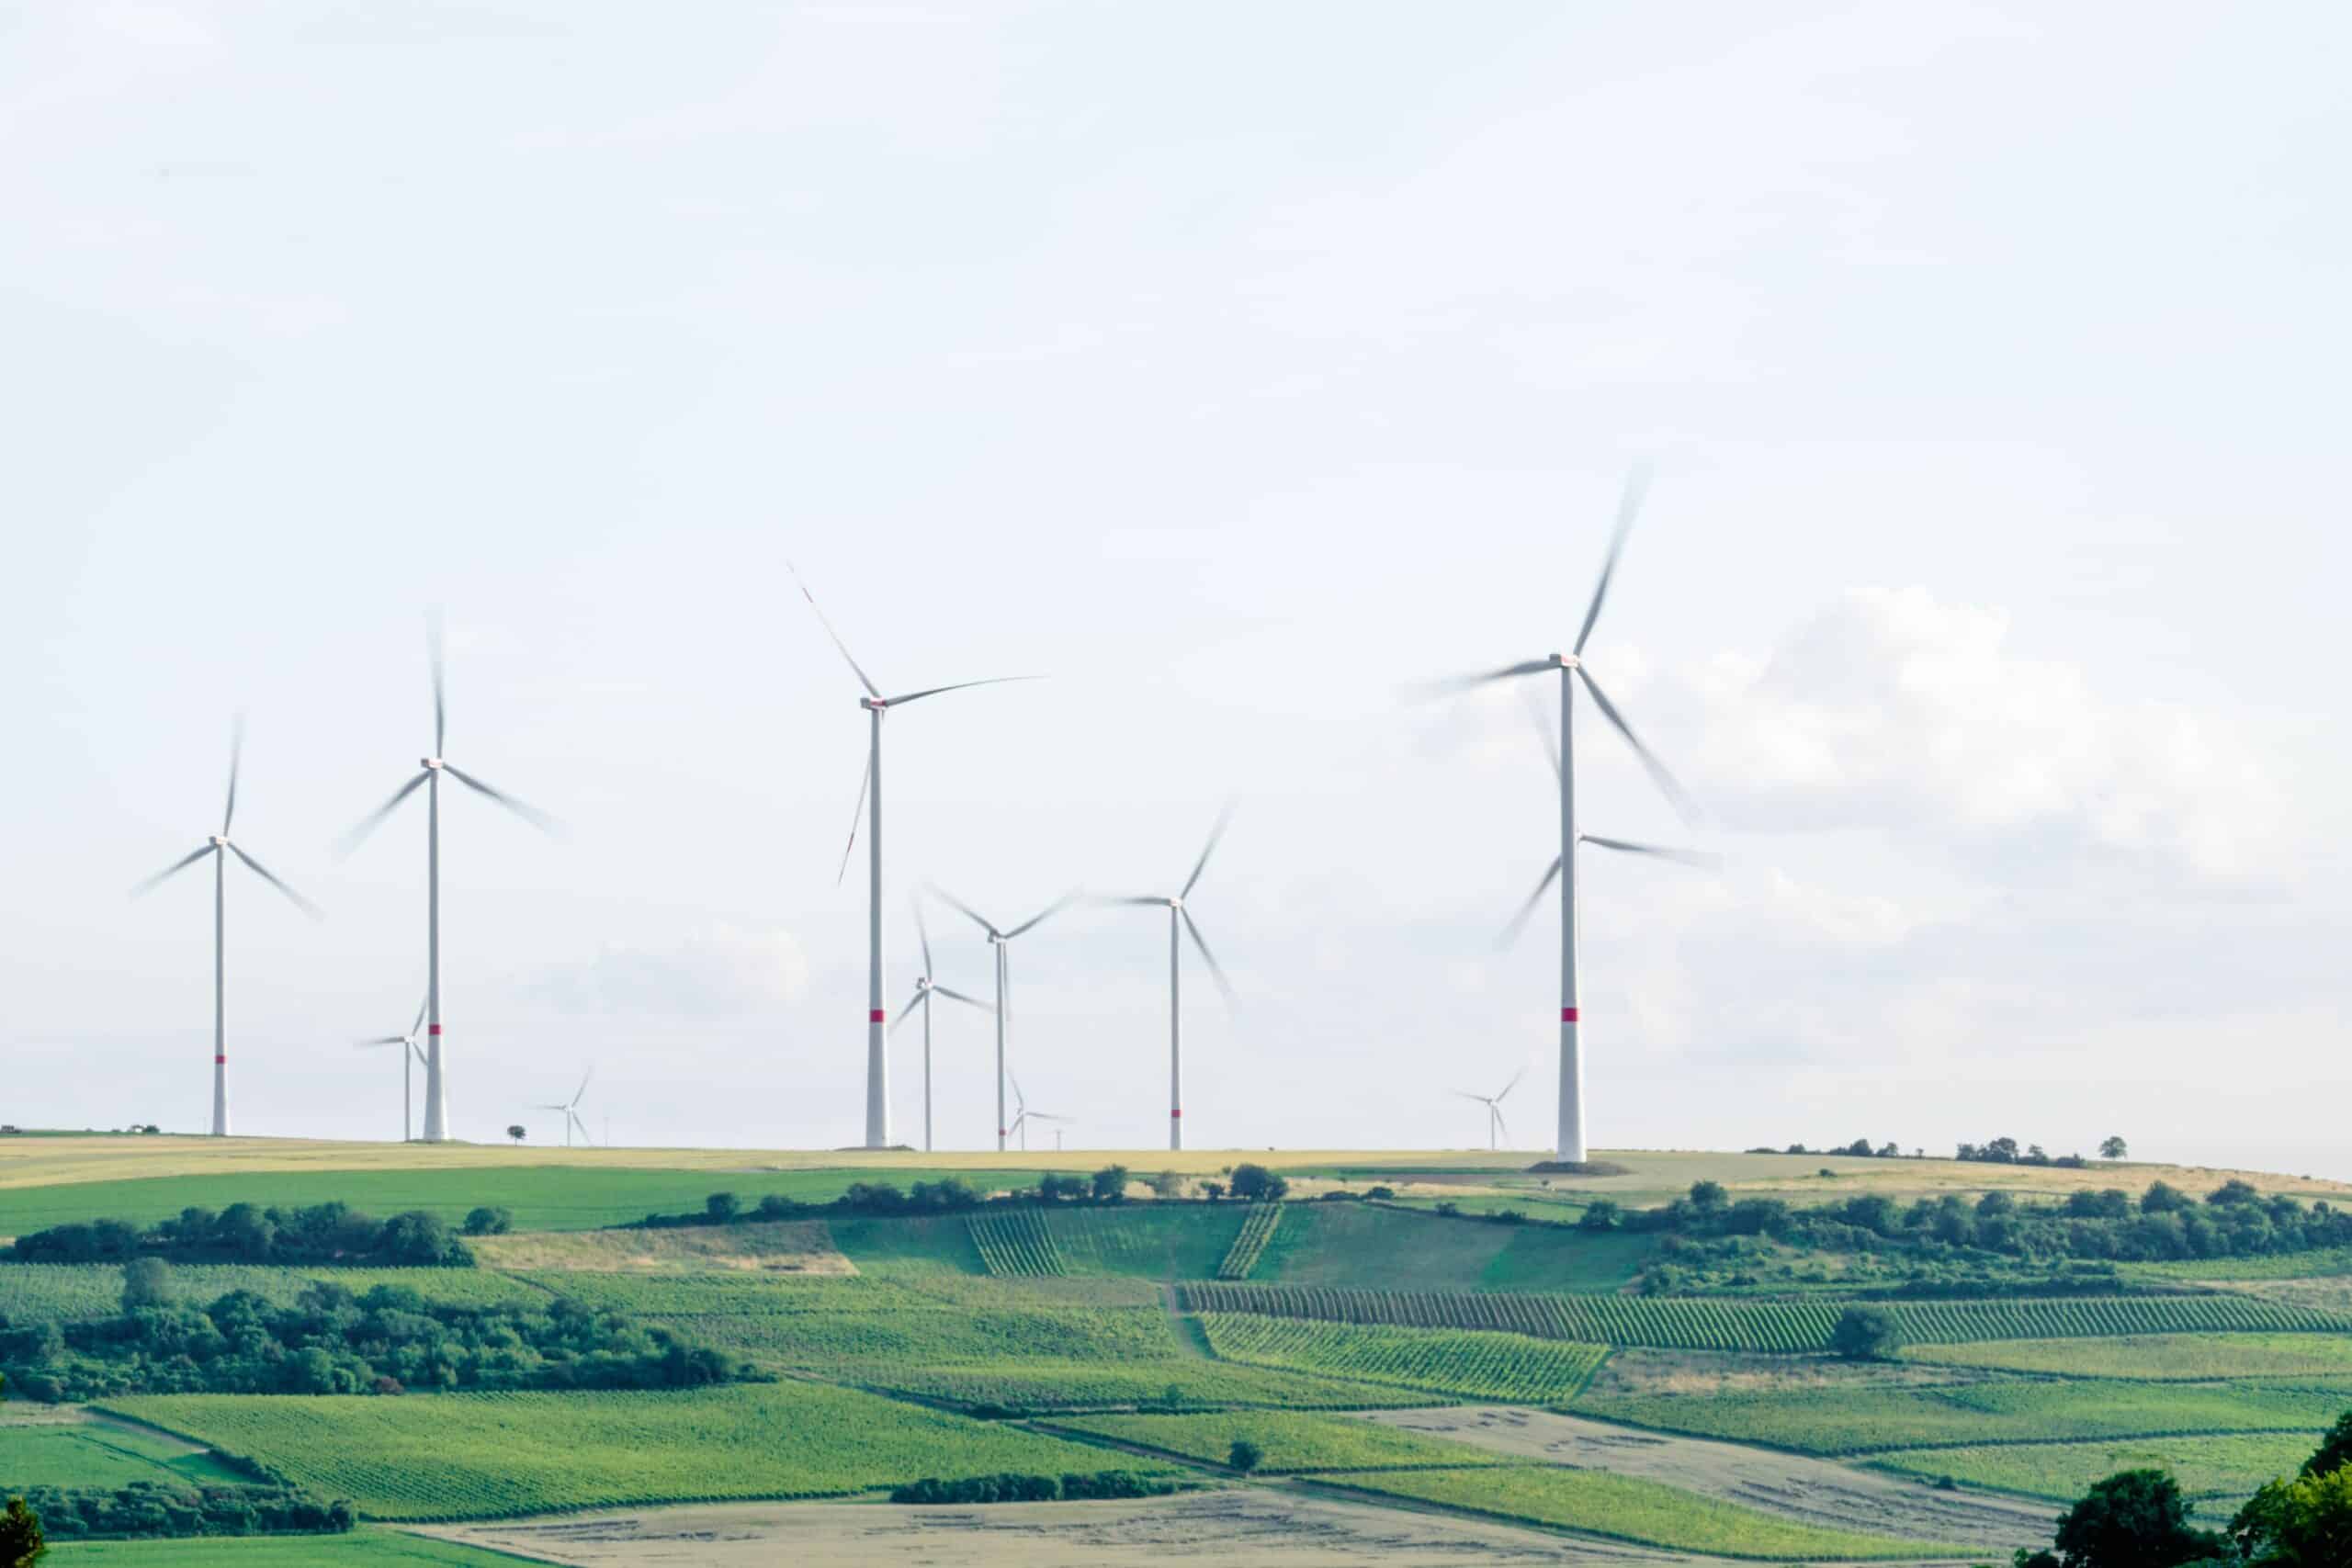 wind turbines in lush green field environmental IoT improves sustainability